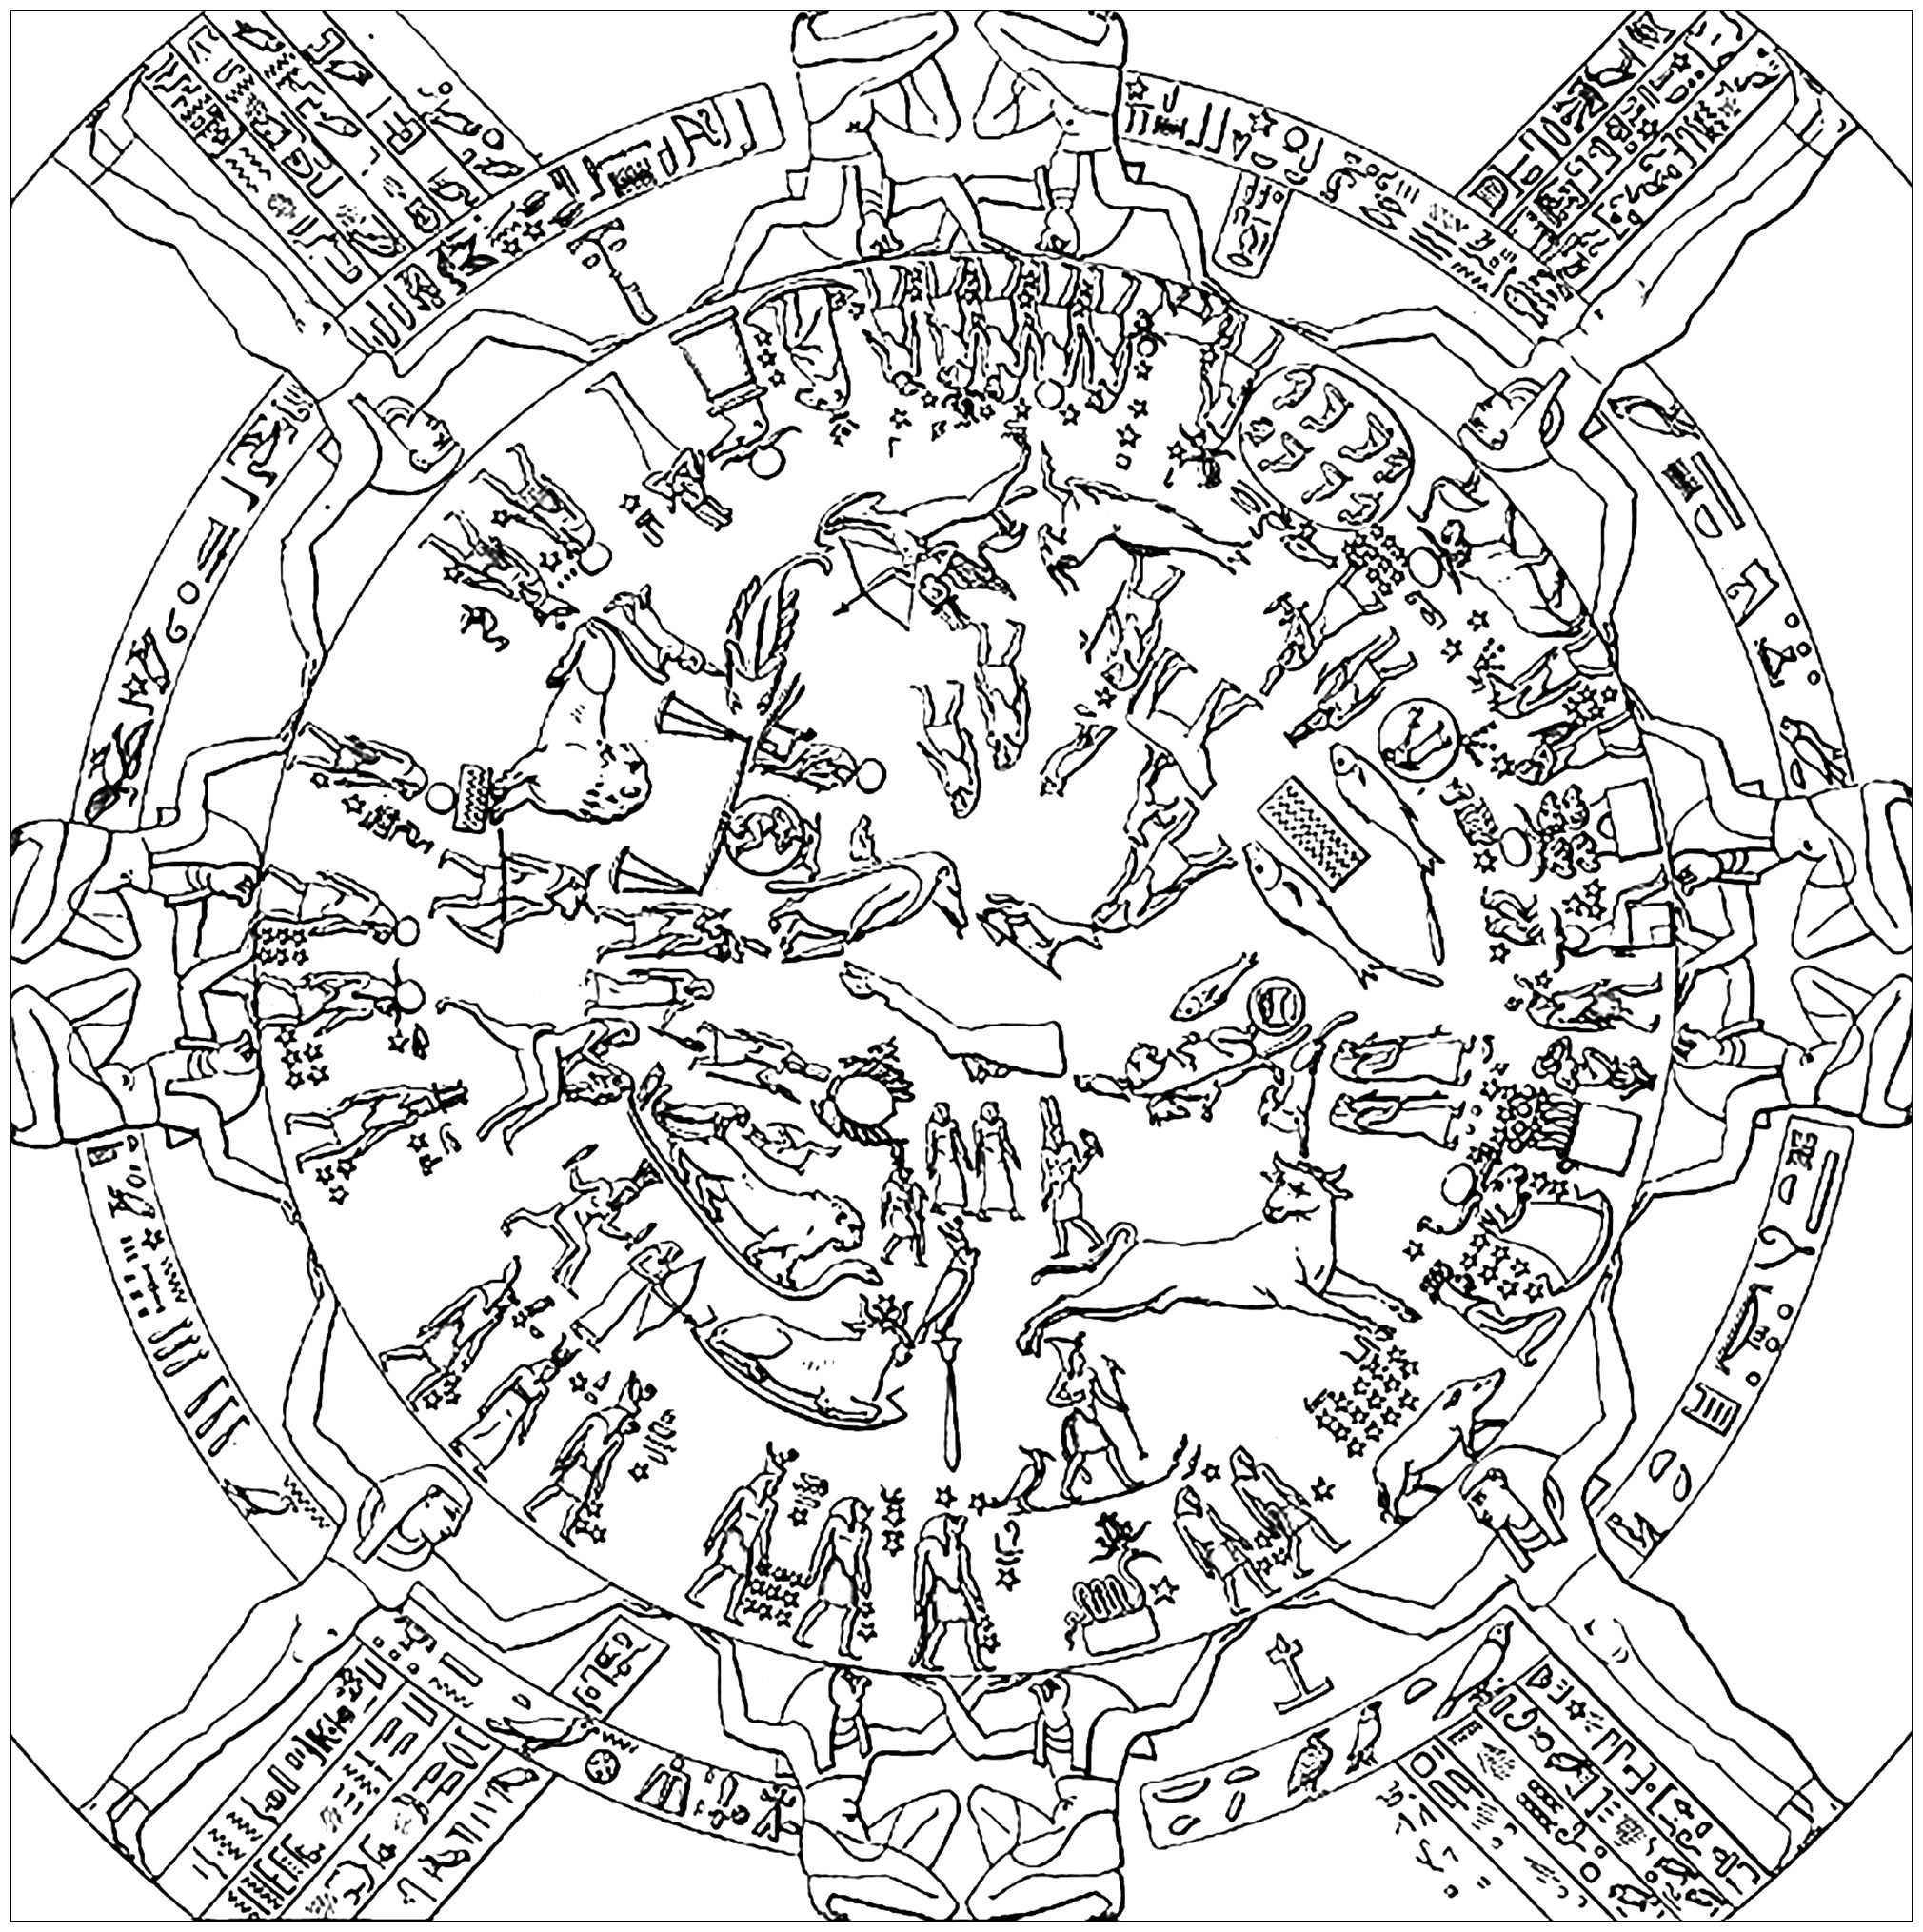 Coloring page created from the first drawing of the Dendera Zodiac (1802). The Dendera Zodiac is one of the best-preserved ancient depictions of the observable stars. Although it contains many of the Zodiac symbols as they are known today, it is more accurately described as a star map than an astrological chart. It shows all five planets known to the Ancient Egyptians in an alignment that occurs once every one thousand years, as well as both a solar and lunar eclipse. The planet alignment allows astrophysicists to date the sky that’s depicted as having occurred sometime between June 15 and August 15, 50 BCE.